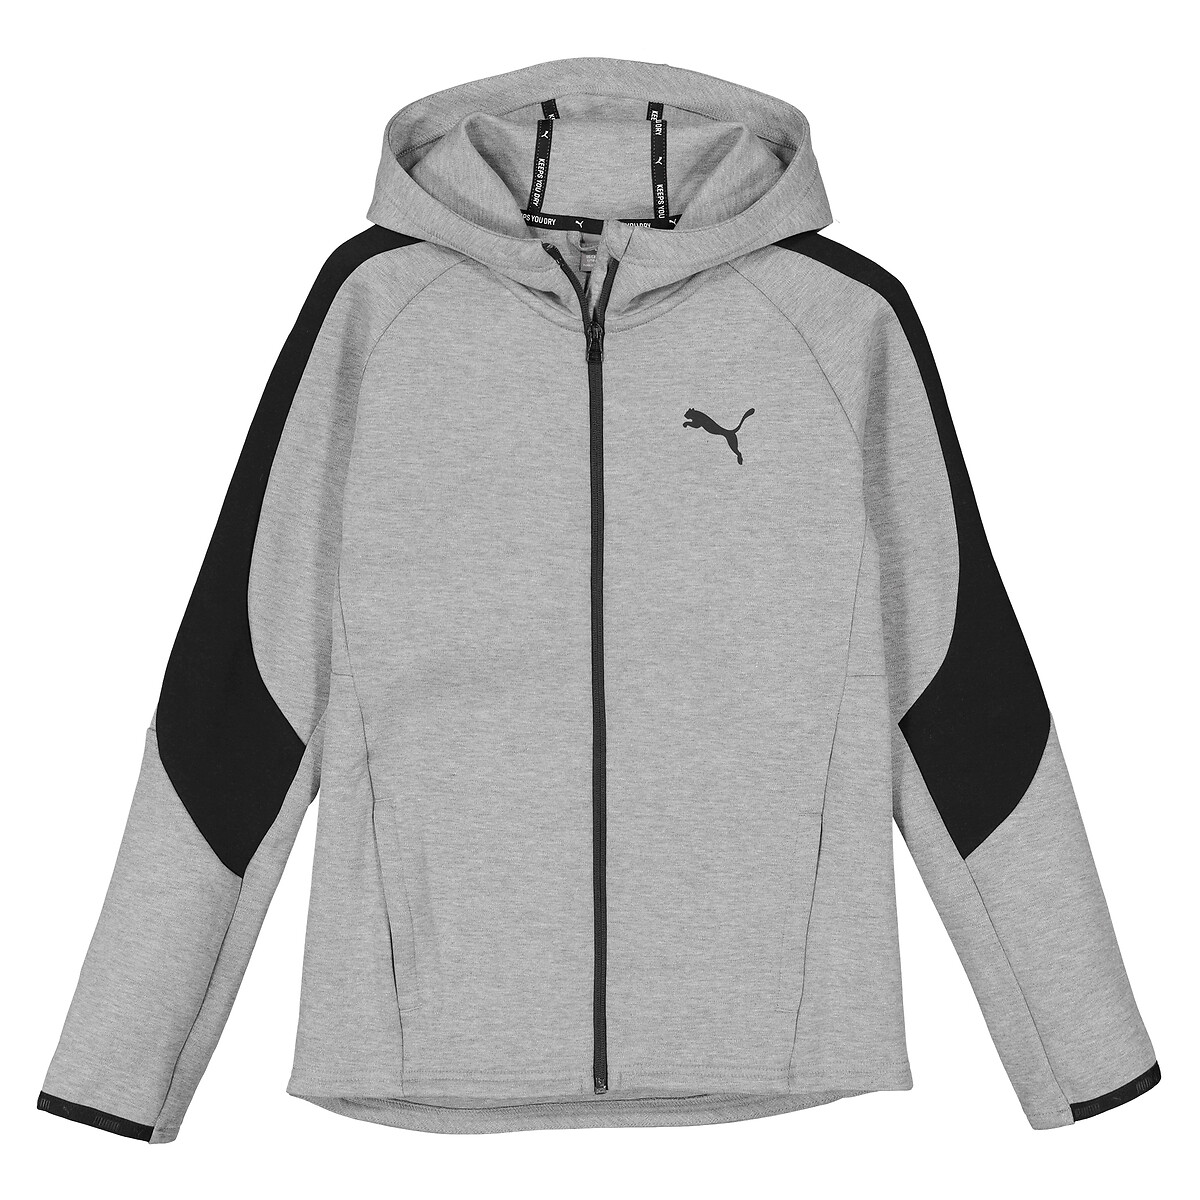 Image of Evostripe Zip-Up Hoodie in Recycled/Cotton Mix